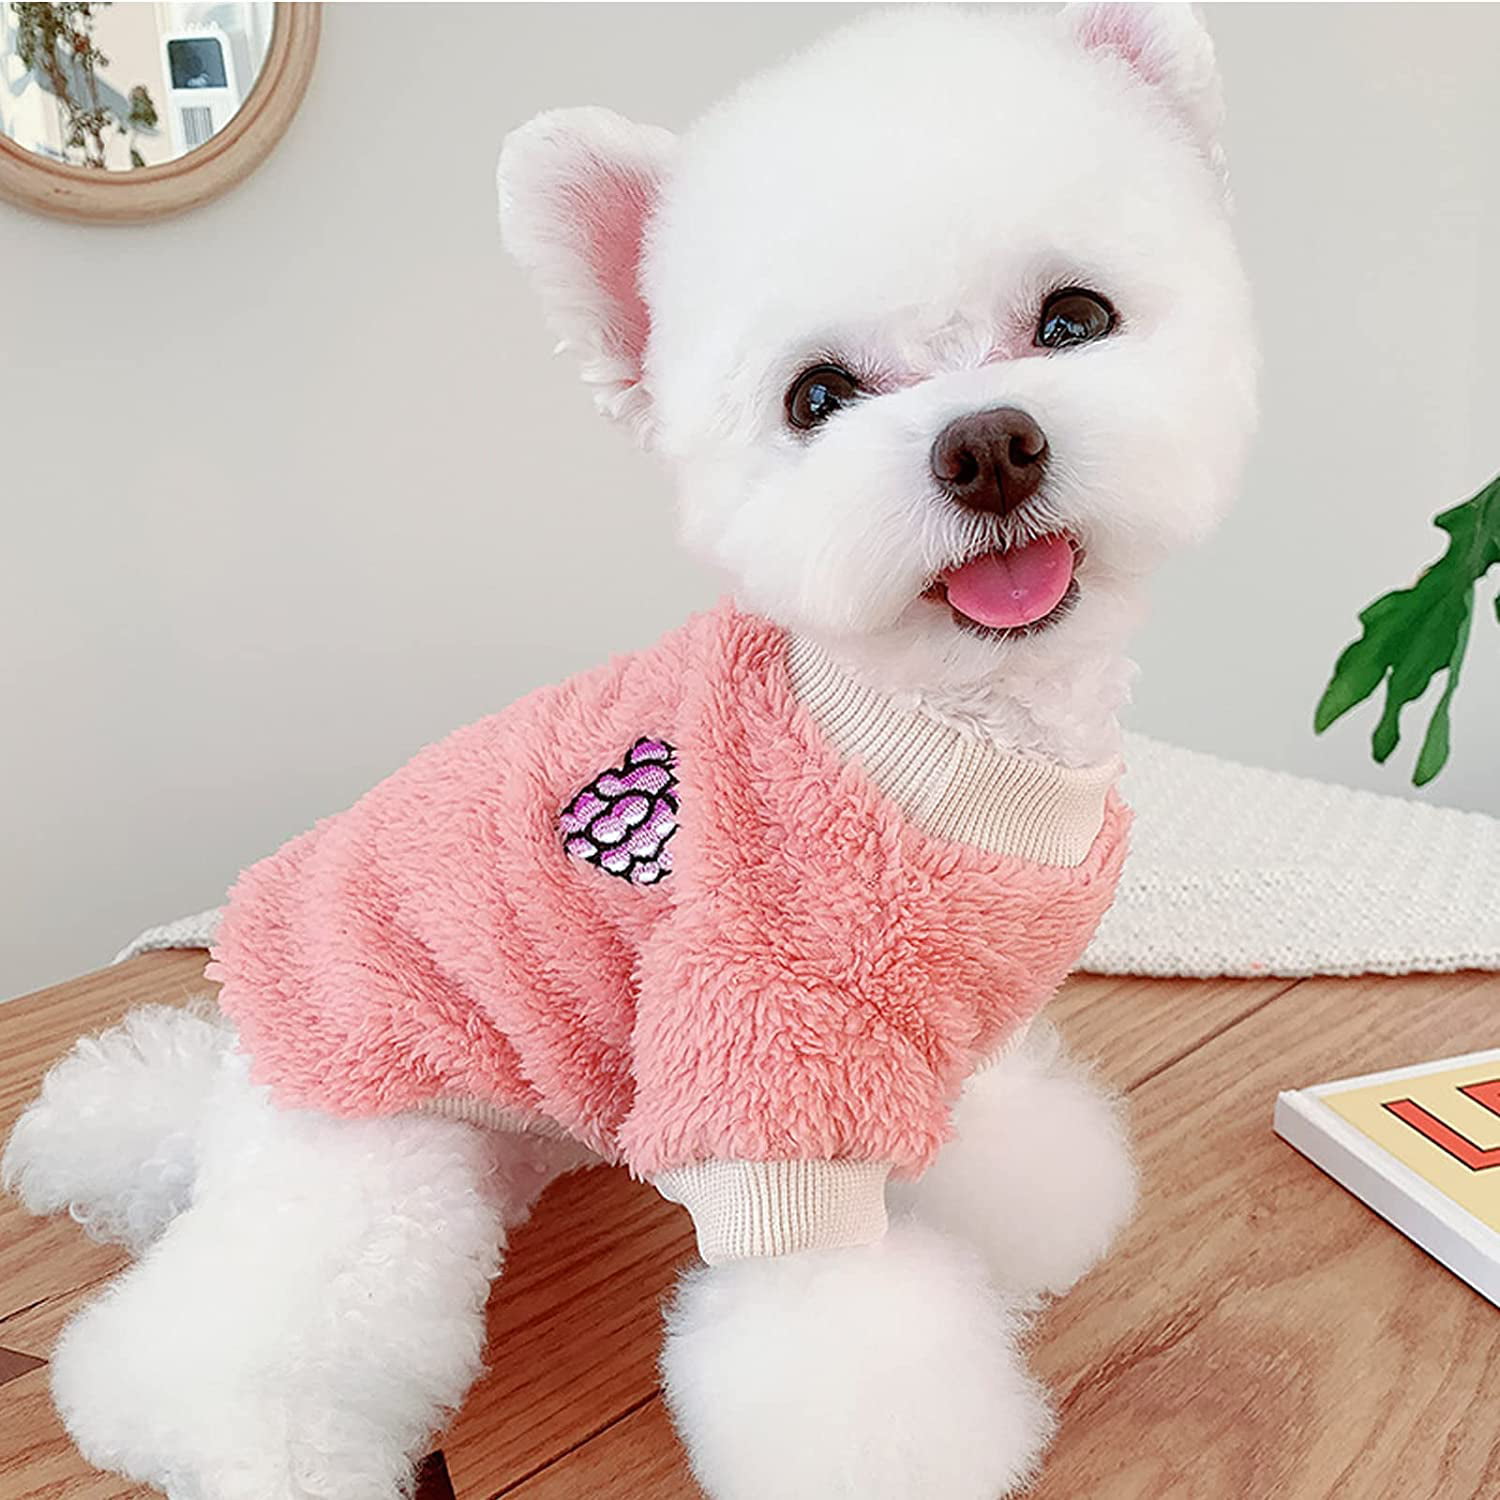 QWZNDZGR Dog Wool Hoodies Cat Sweater Winter Fashion Thickening Warm Sphynx  Clothes Home Comfortable Winter Dog Clothes for Small Dogs 